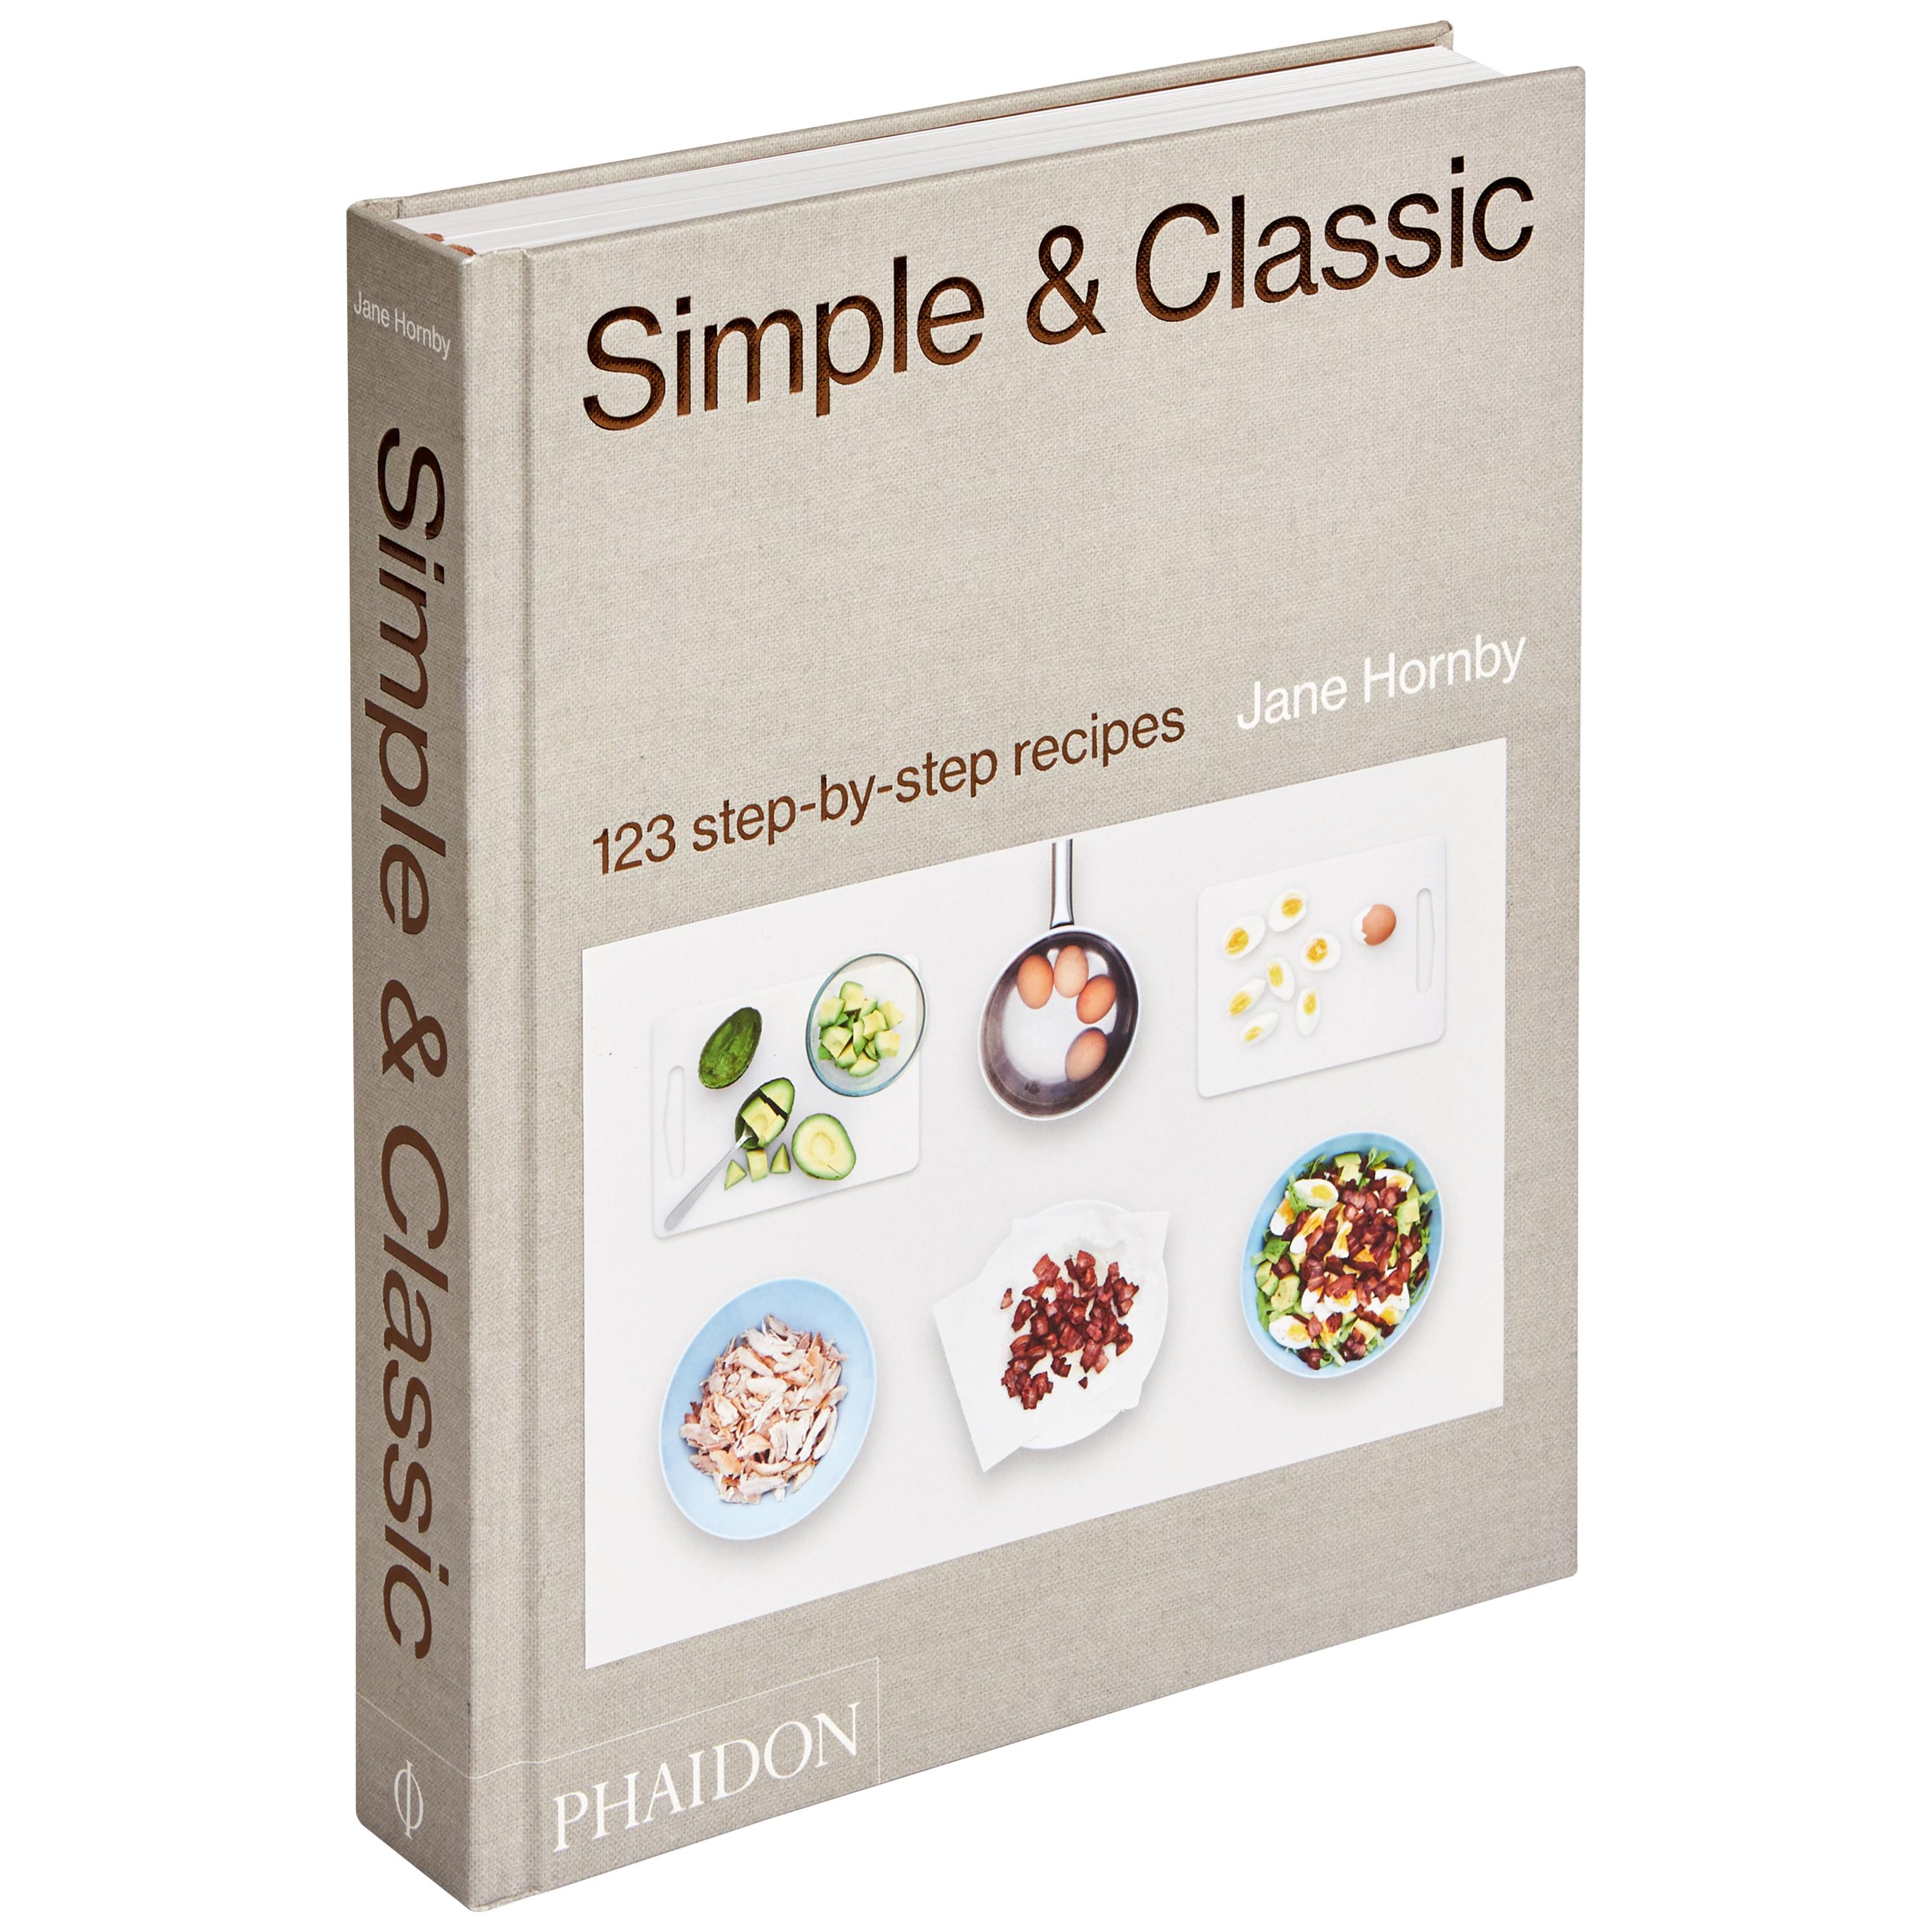 "Simple & Classic 123 step-by-step recipes" Book